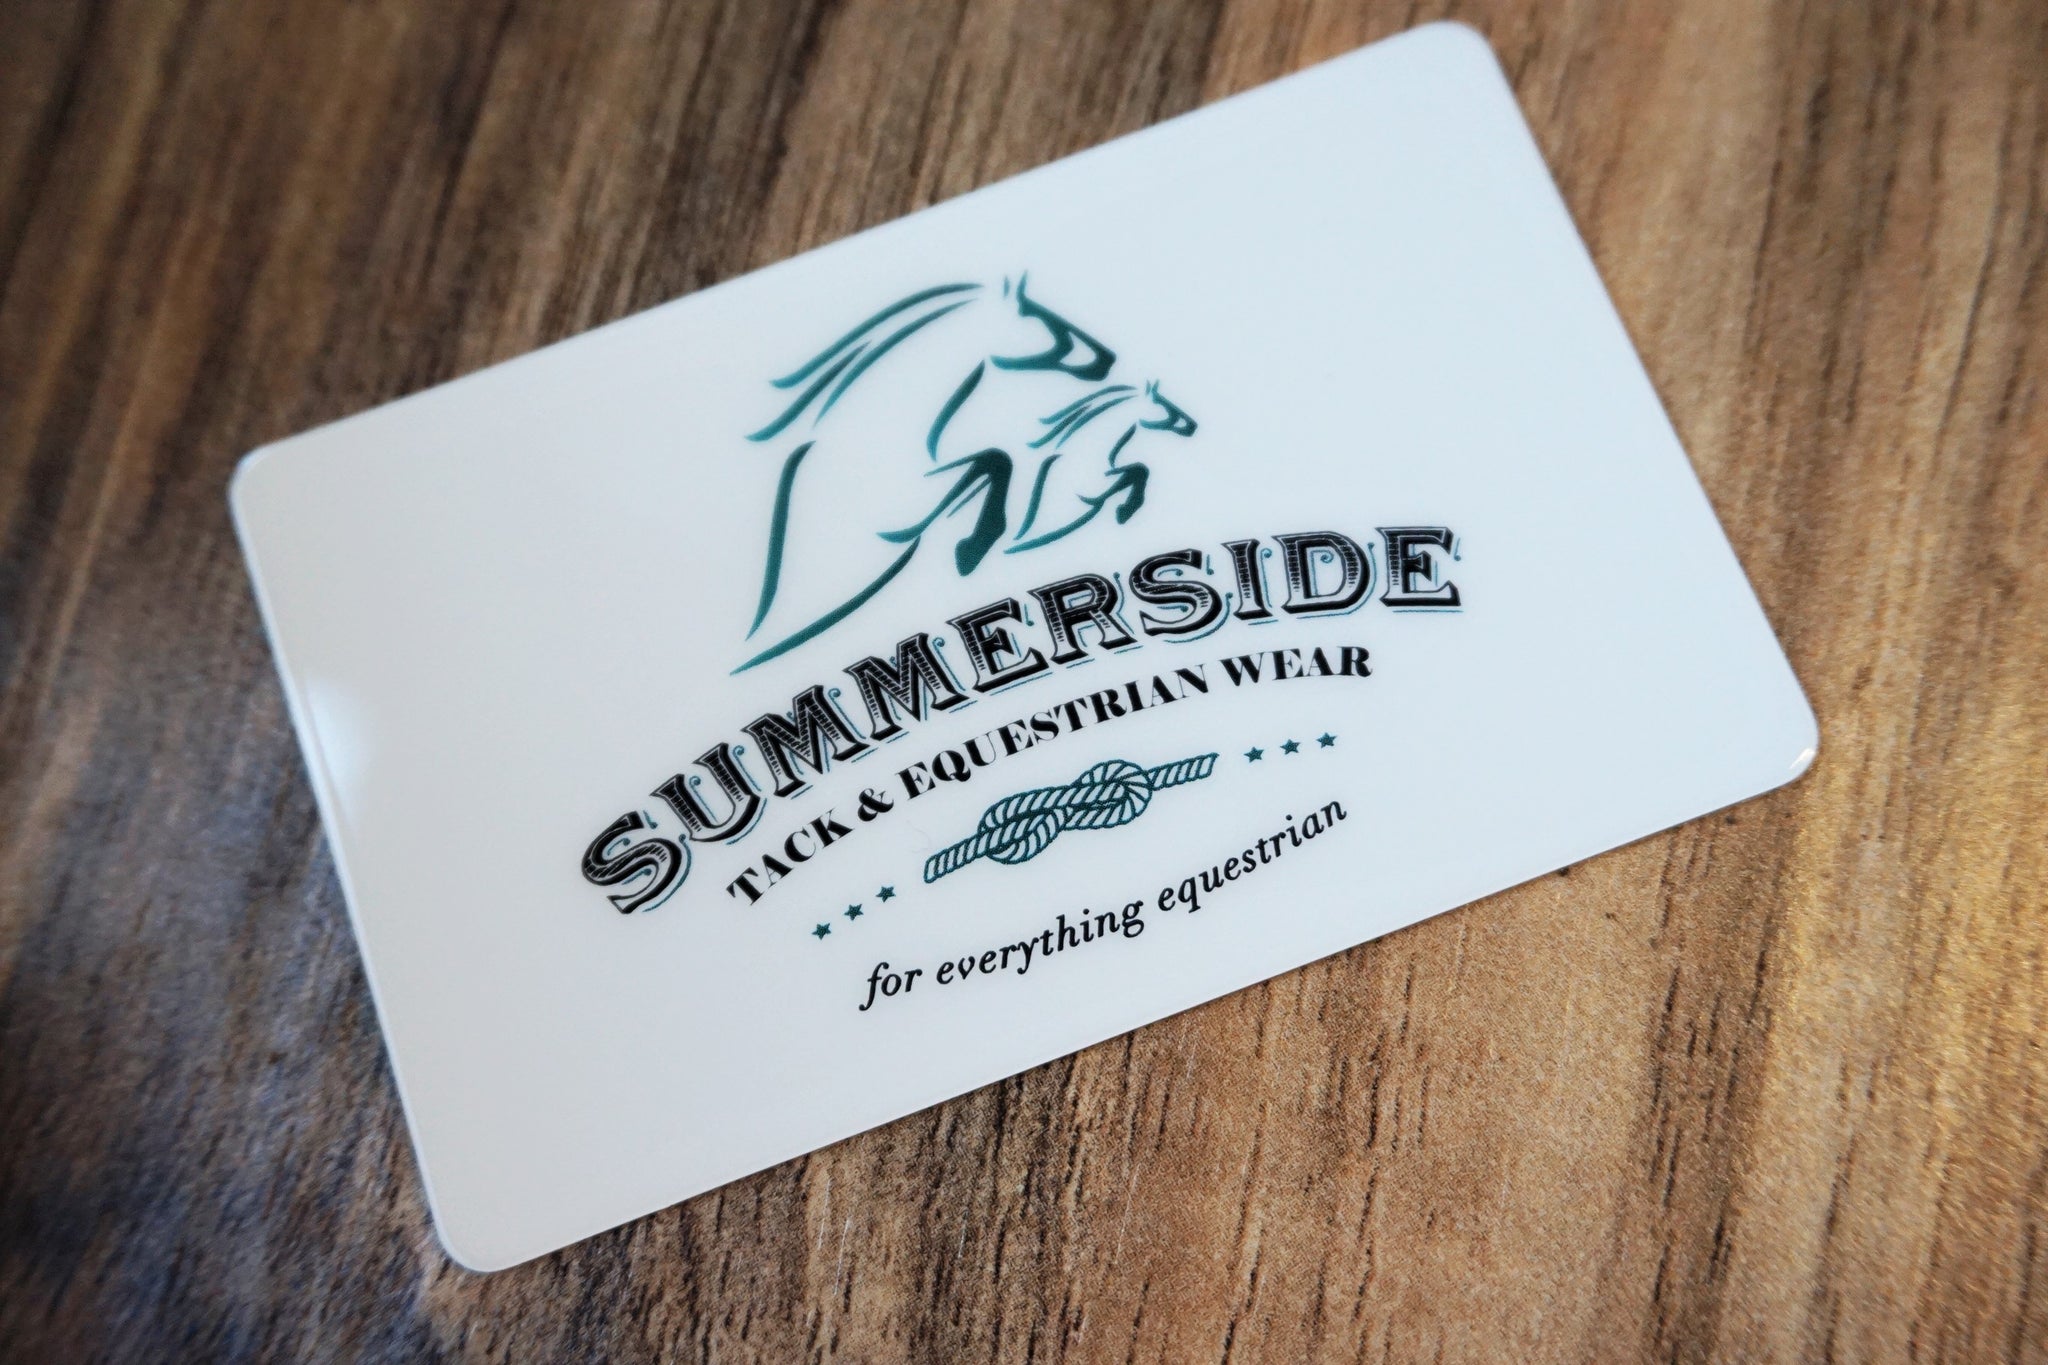 Equine Wear Tagged Woof Wear - Summerside Tack and Equestrian Wear